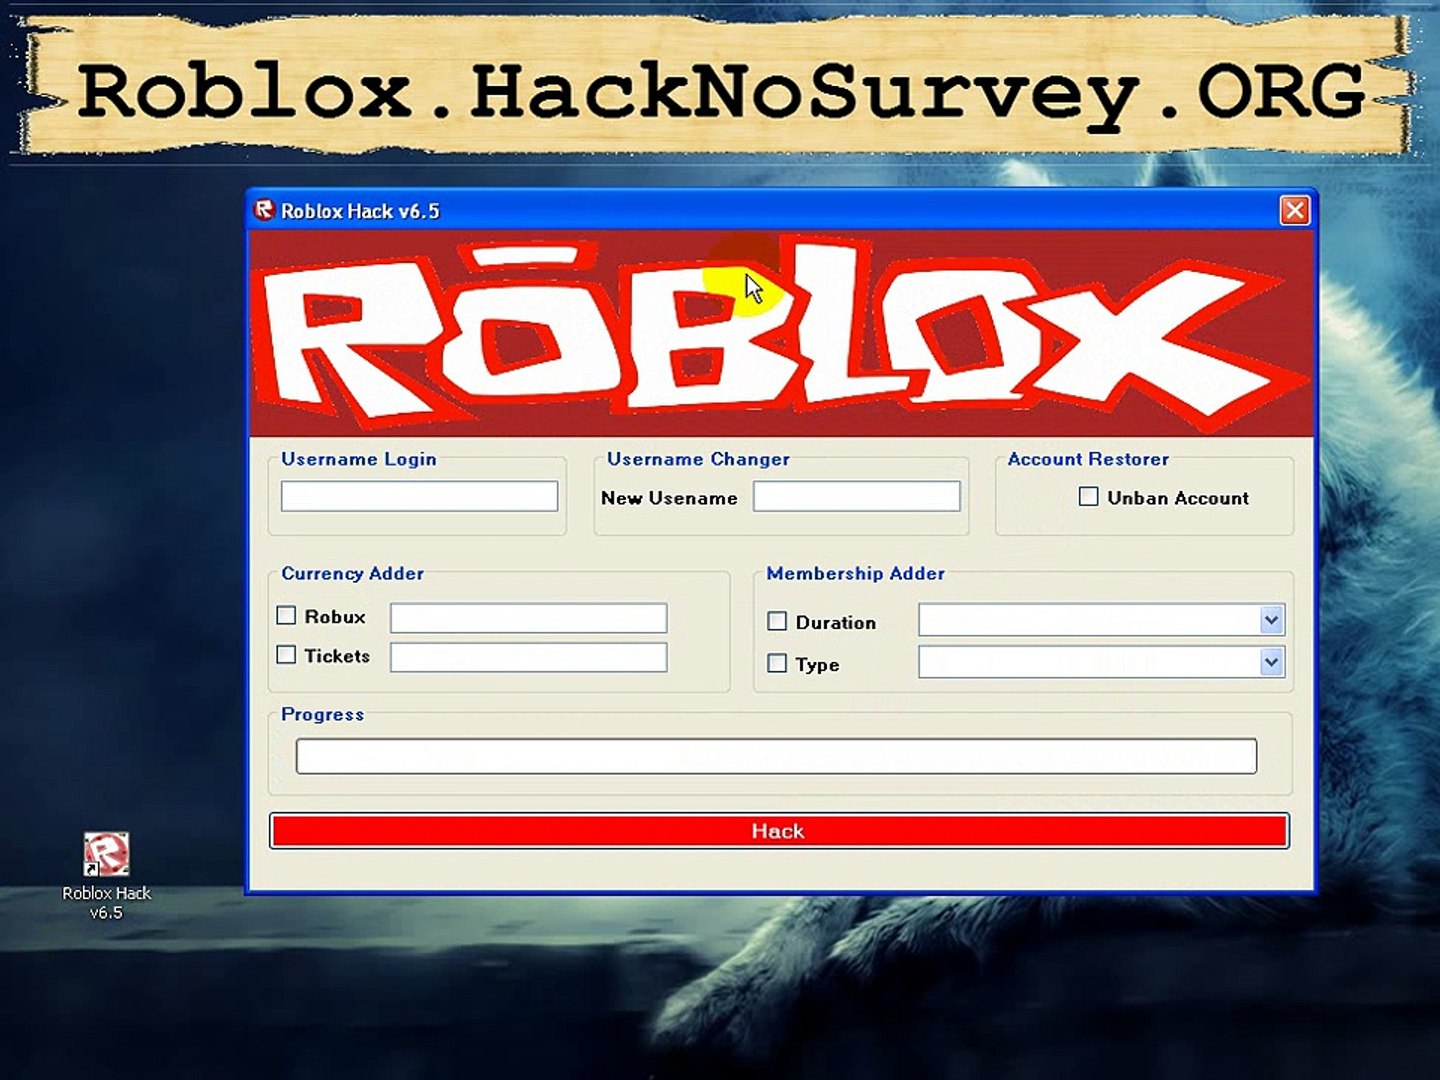 Roblox Hack Membership Adder Robux Tix Generator 2015 Video Dailymotion - roblox hack tool get free robux tix with the online generator